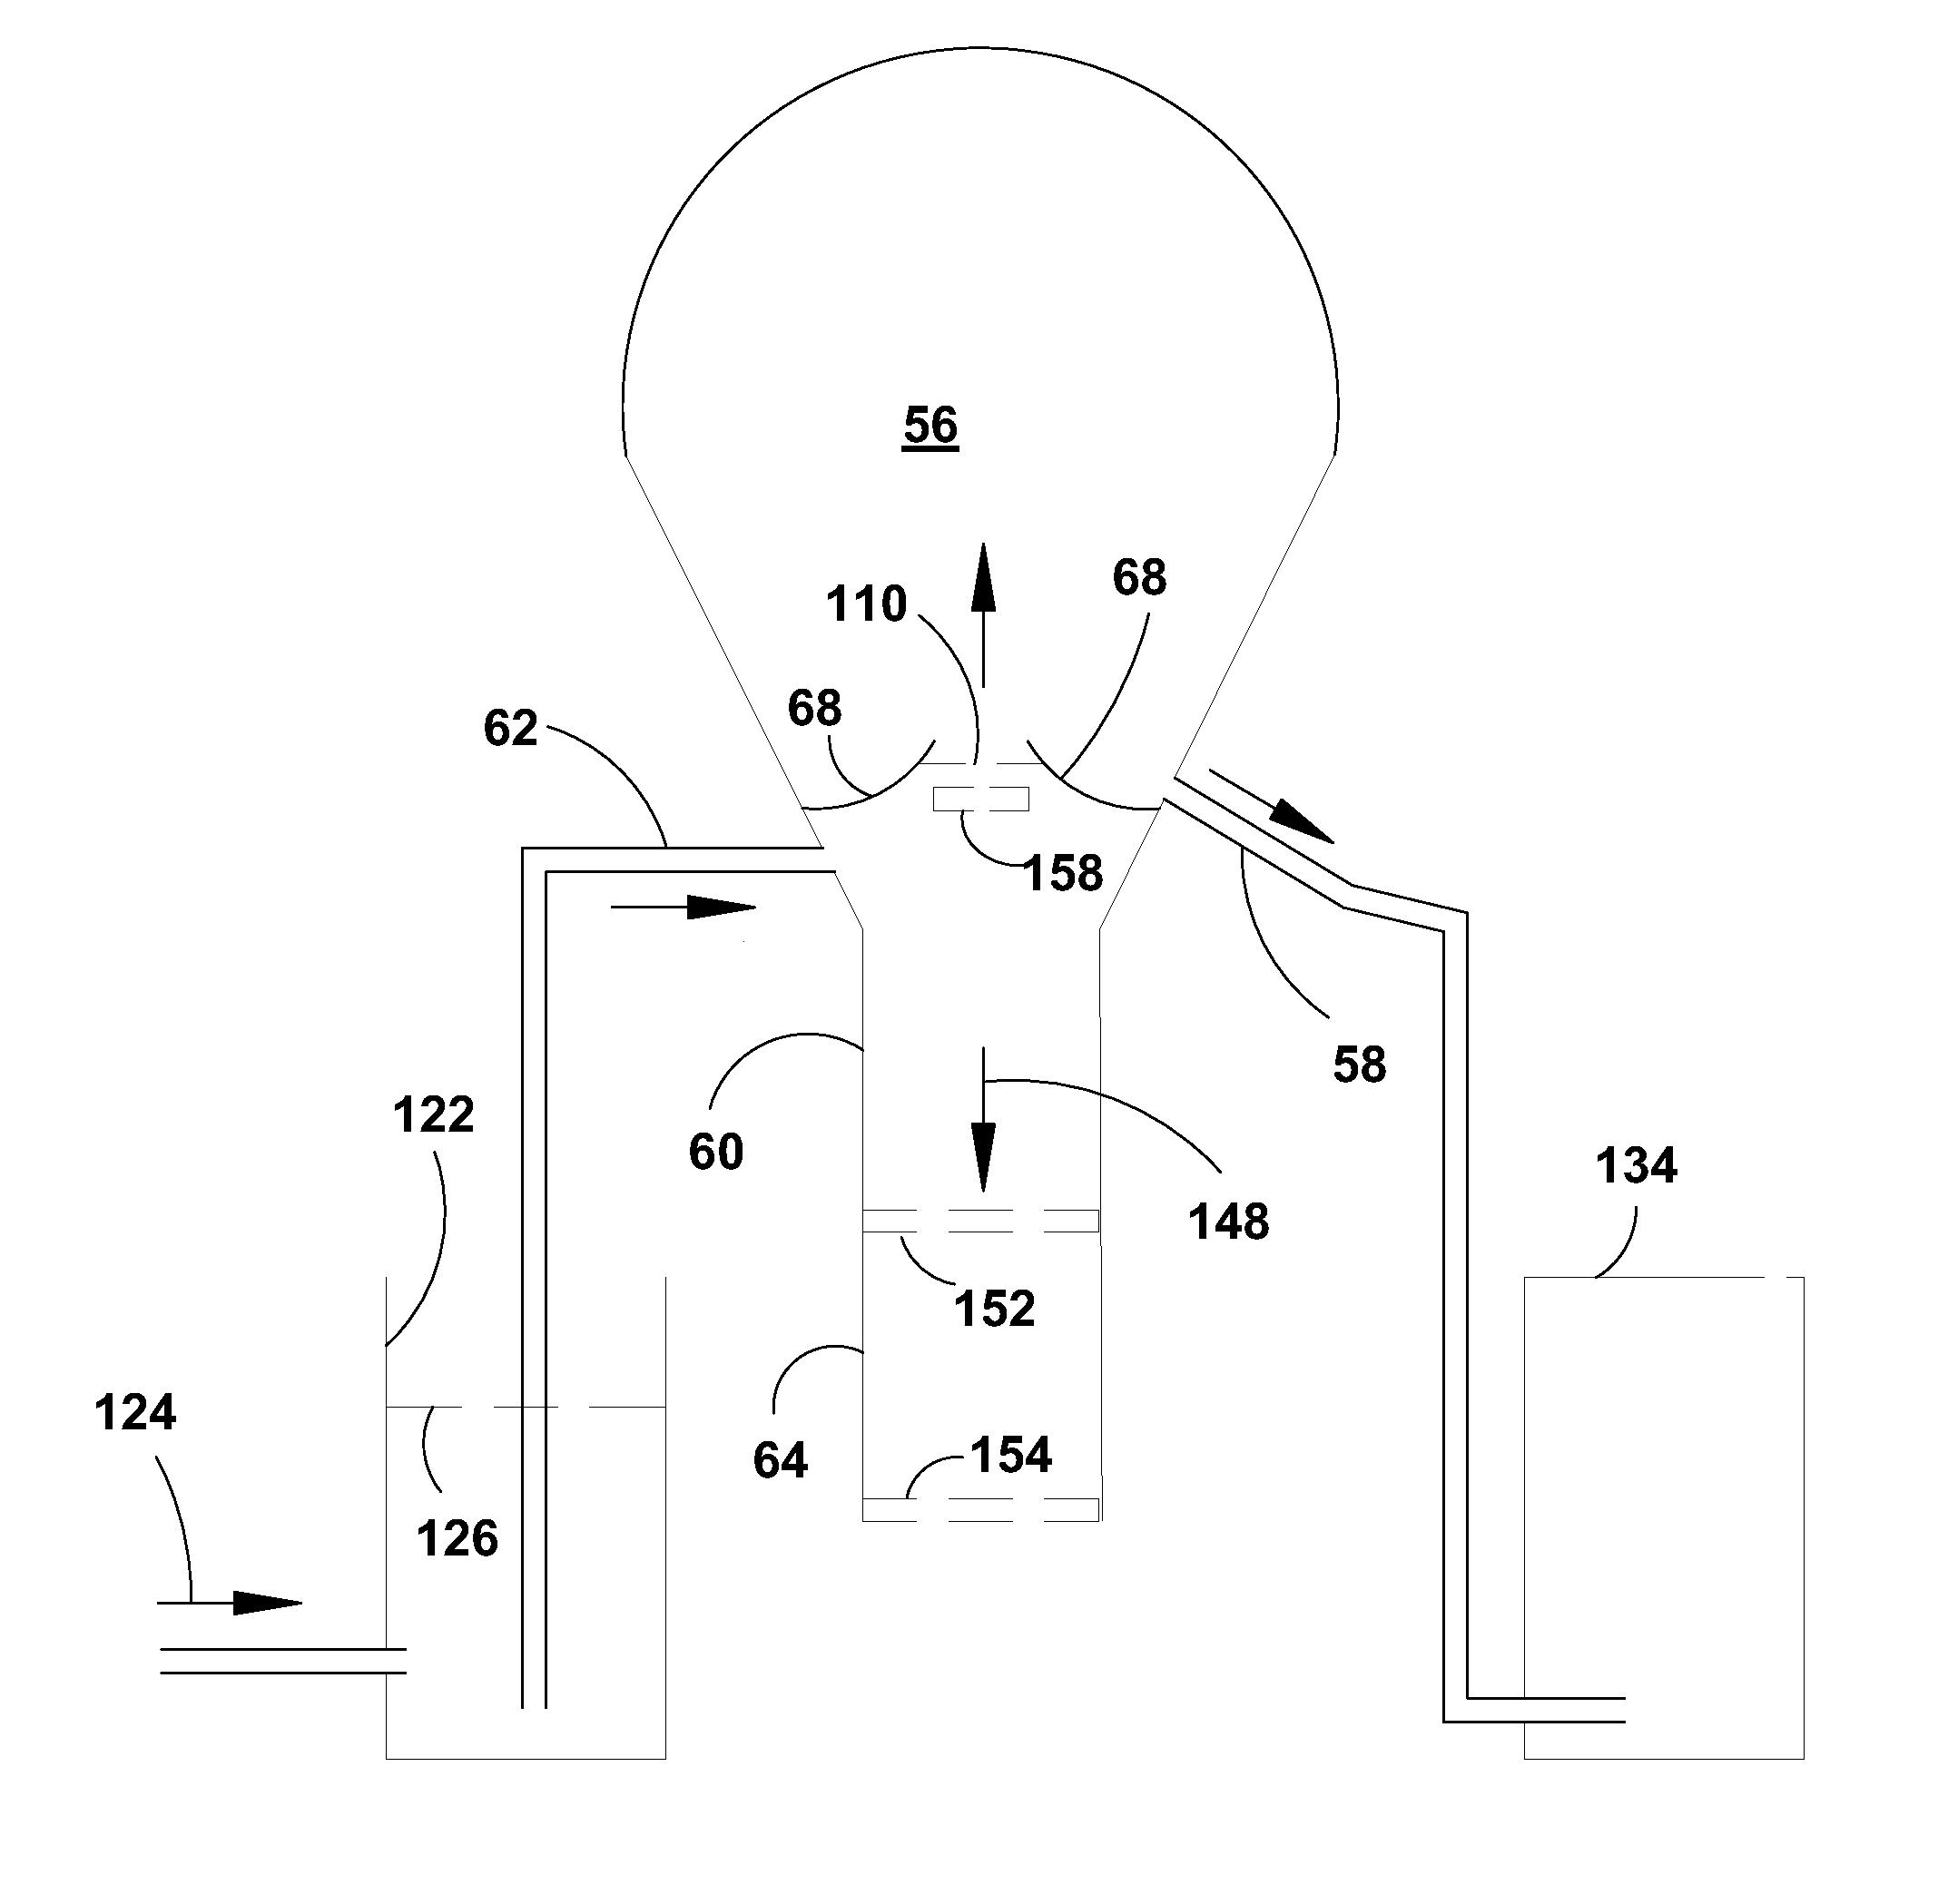 System for concentrating industrial products and by-products